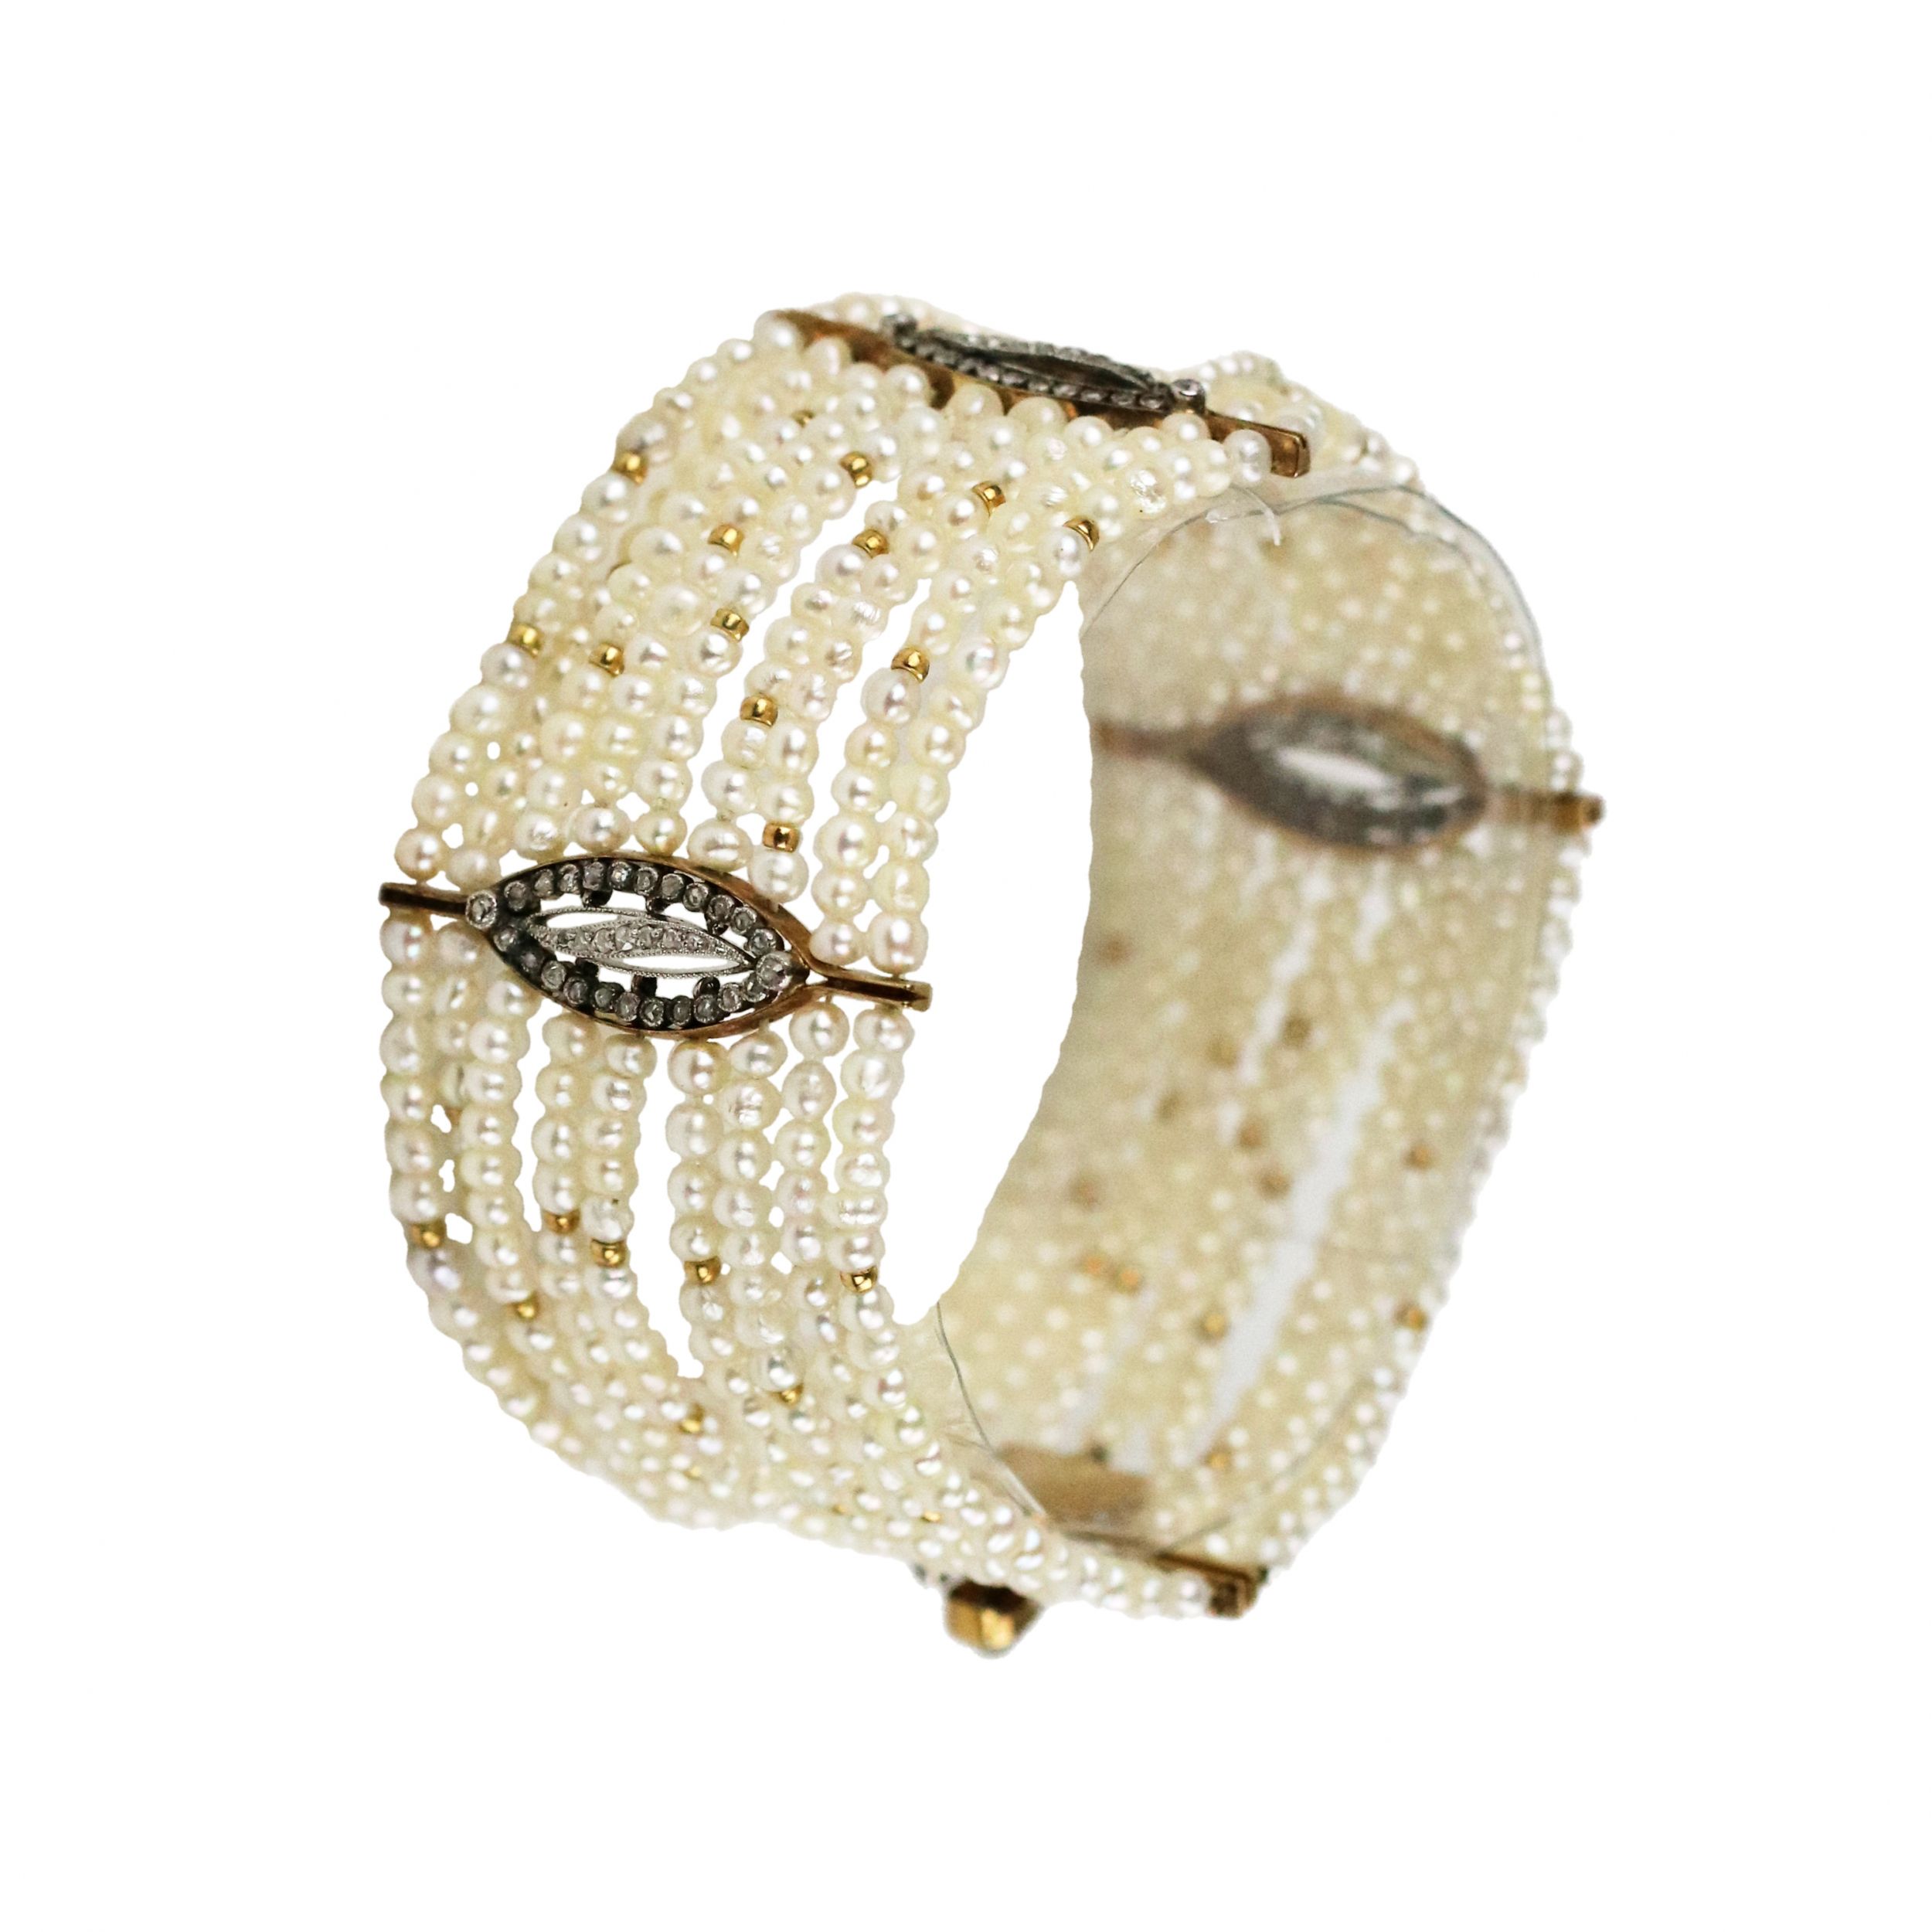 Pearl-bracelet-with-gold-and-diamonds-late-Art-Nouveau-style-